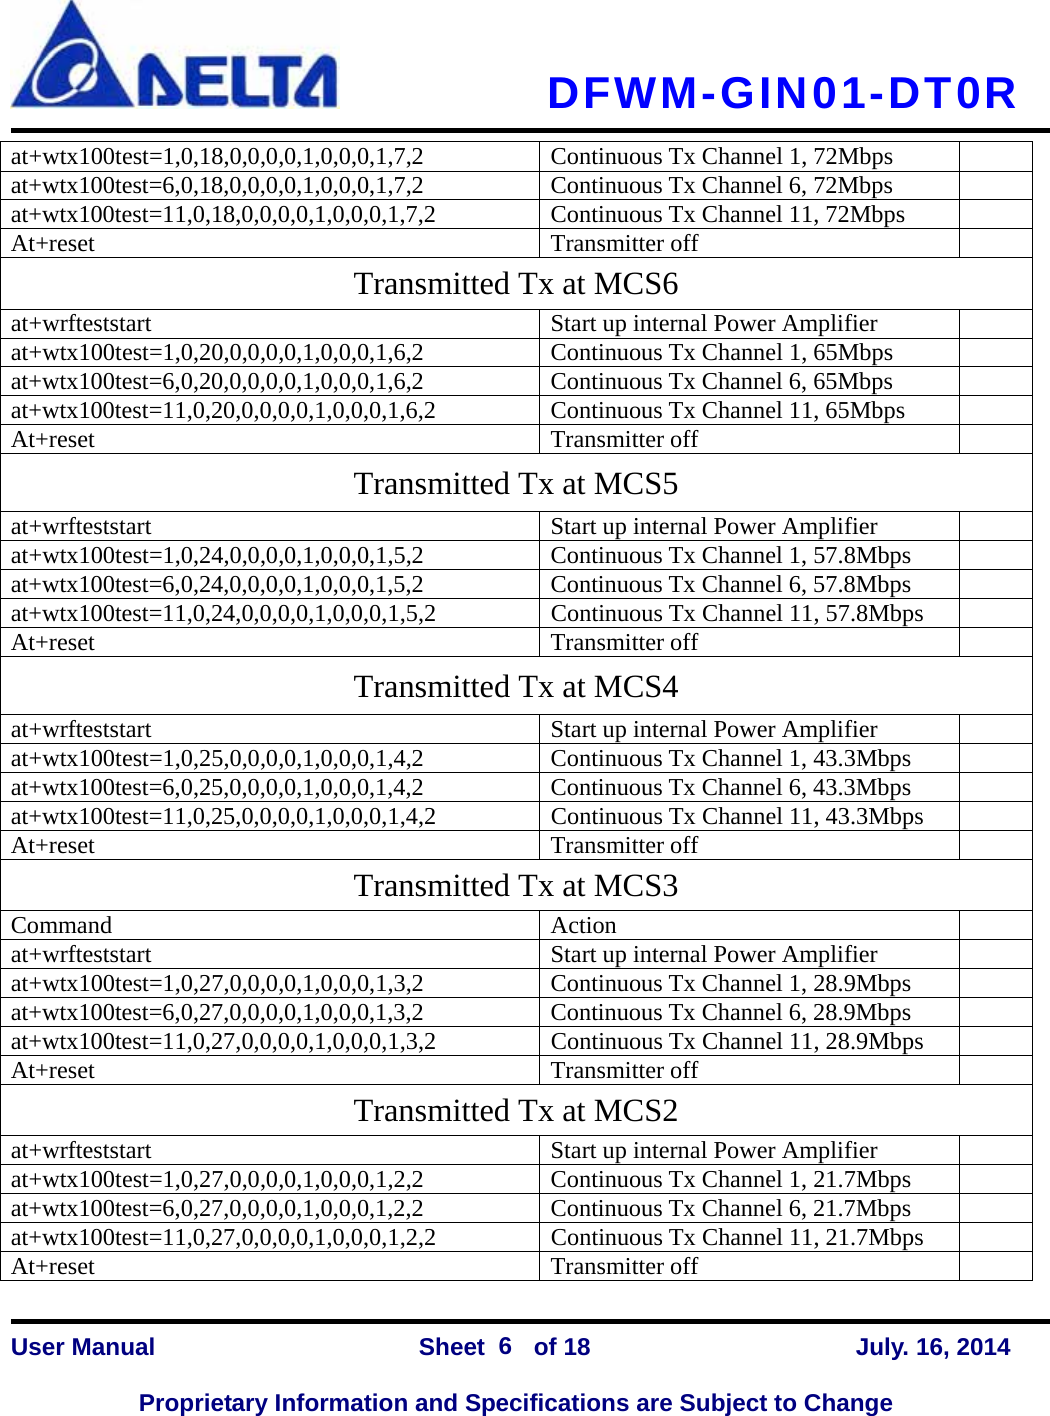   DFWM-GIN01-DT0R    User Manual                Sheet    of 18      July. 16, 2014  Proprietary Information and Specifications are Subject to Change 6 at+wtx100test=1,0,18,0,0,0,0,1,0,0,0,1,7,2 Continuous Tx Channel 1, 72Mbps   at+wtx100test=6,0,18,0,0,0,0,1,0,0,0,1,7,2  Continuous Tx Channel 6, 72Mbps   at+wtx100test=11,0,18,0,0,0,0,1,0,0,0,1,7,2  Continuous Tx Channel 11, 72Mbps   At+reset Transmitter off  Transmitted Tx at MCS6 at+wrfteststart  Start up internal Power Amplifier   at+wtx100test=1,0,20,0,0,0,0,1,0,0,0,1,6,2 Continuous Tx Channel 1, 65Mbps   at+wtx100test=6,0,20,0,0,0,0,1,0,0,0,1,6,2  Continuous Tx Channel 6, 65Mbps   at+wtx100test=11,0,20,0,0,0,0,1,0,0,0,1,6,2  Continuous Tx Channel 11, 65Mbps   At+reset Transmitter off  Transmitted Tx at MCS5 at+wrfteststart  Start up internal Power Amplifier   at+wtx100test=1,0,24,0,0,0,0,1,0,0,0,1,5,2 Continuous Tx Channel 1, 57.8Mbps   at+wtx100test=6,0,24,0,0,0,0,1,0,0,0,1,5,2  Continuous Tx Channel 6, 57.8Mbps   at+wtx100test=11,0,24,0,0,0,0,1,0,0,0,1,5,2  Continuous Tx Channel 11, 57.8Mbps   At+reset Transmitter off  Transmitted Tx at MCS4 at+wrfteststart  Start up internal Power Amplifier   at+wtx100test=1,0,25,0,0,0,0,1,0,0,0,1,4,2 Continuous Tx Channel 1, 43.3Mbps   at+wtx100test=6,0,25,0,0,0,0,1,0,0,0,1,4,2  Continuous Tx Channel 6, 43.3Mbps   at+wtx100test=11,0,25,0,0,0,0,1,0,0,0,1,4,2  Continuous Tx Channel 11, 43.3Mbps   At+reset Transmitter off  Transmitted Tx at MCS3 Command Action  at+wrfteststart  Start up internal Power Amplifier   at+wtx100test=1,0,27,0,0,0,0,1,0,0,0,1,3,2 Continuous Tx Channel 1, 28.9Mbps   at+wtx100test=6,0,27,0,0,0,0,1,0,0,0,1,3,2  Continuous Tx Channel 6, 28.9Mbps   at+wtx100test=11,0,27,0,0,0,0,1,0,0,0,1,3,2  Continuous Tx Channel 11, 28.9Mbps   At+reset Transmitter off  Transmitted Tx at MCS2 at+wrfteststart  Start up internal Power Amplifier   at+wtx100test=1,0,27,0,0,0,0,1,0,0,0,1,2,2 Continuous Tx Channel 1, 21.7Mbps   at+wtx100test=6,0,27,0,0,0,0,1,0,0,0,1,2,2  Continuous Tx Channel 6, 21.7Mbps   at+wtx100test=11,0,27,0,0,0,0,1,0,0,0,1,2,2  Continuous Tx Channel 11, 21.7Mbps   At+reset Transmitter off  